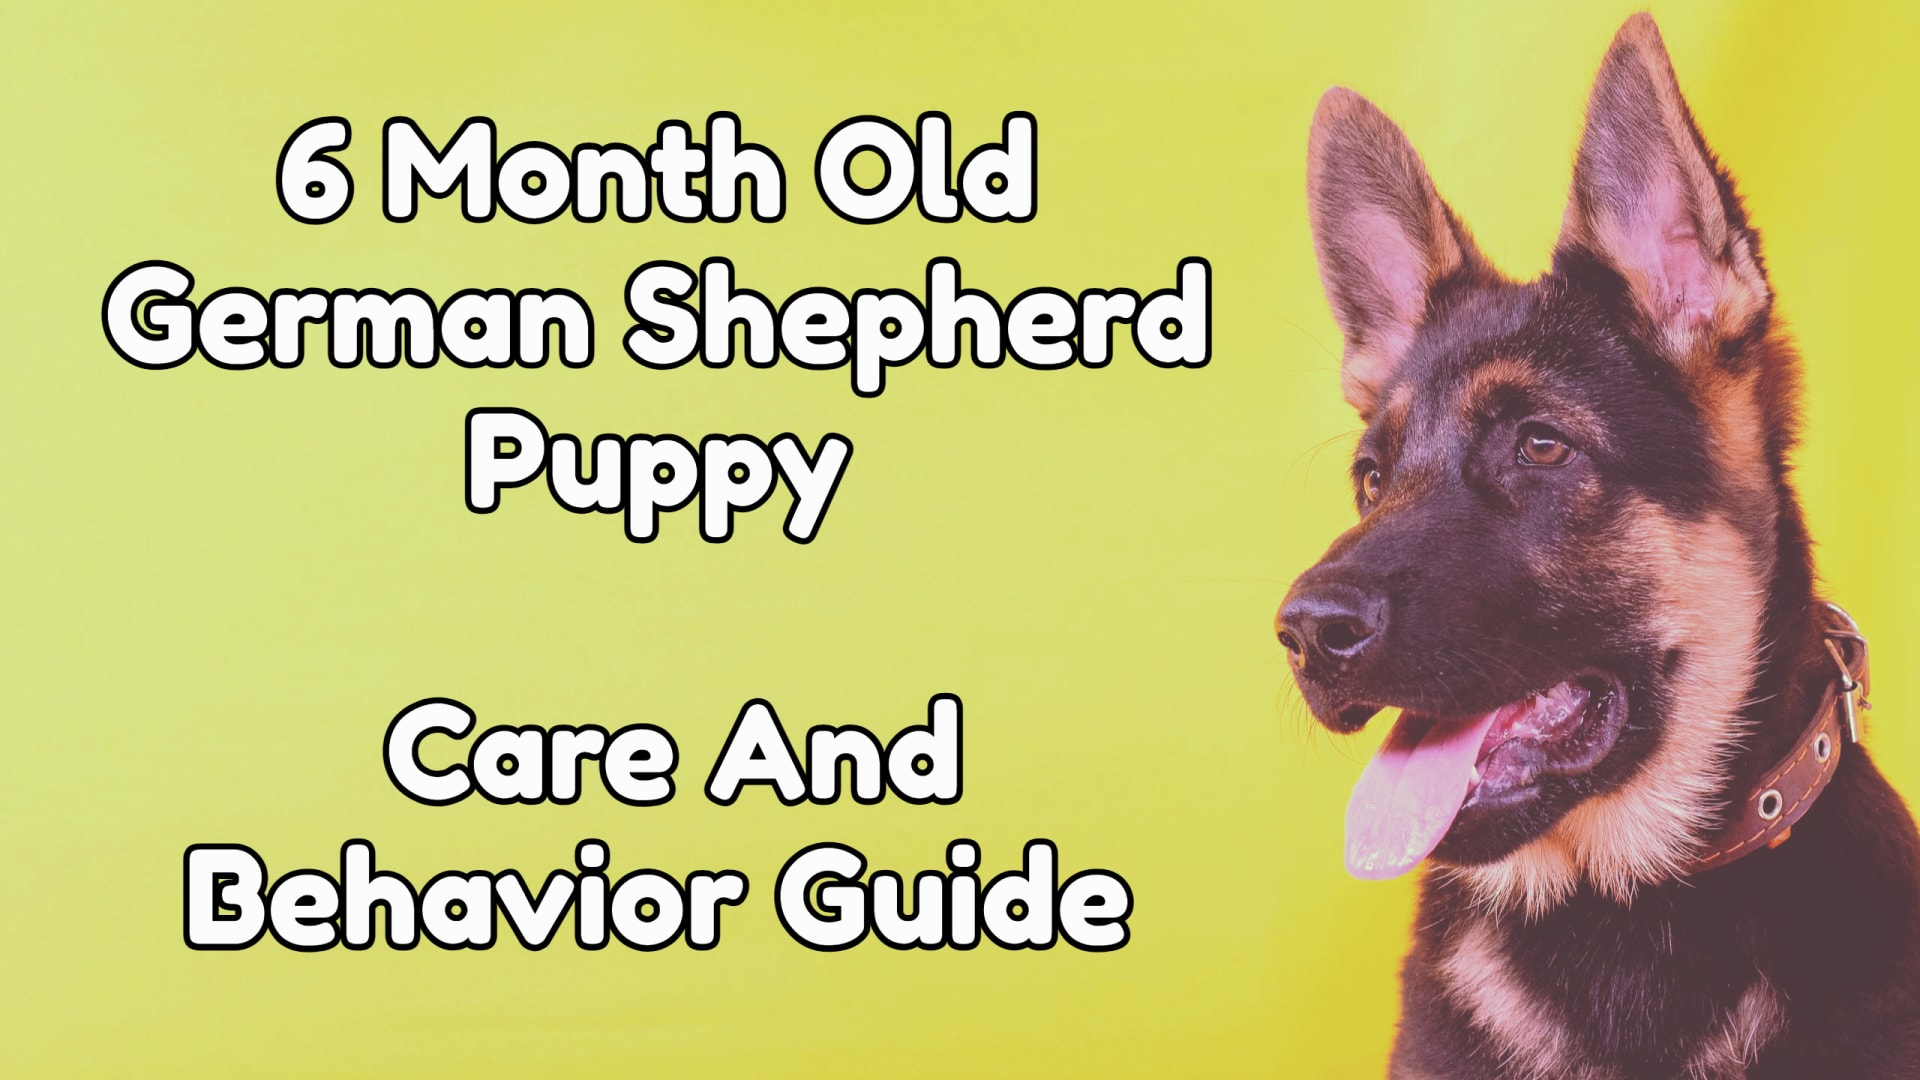 6 Month Old German Shepherd Puppy - Care And Behavior Guide